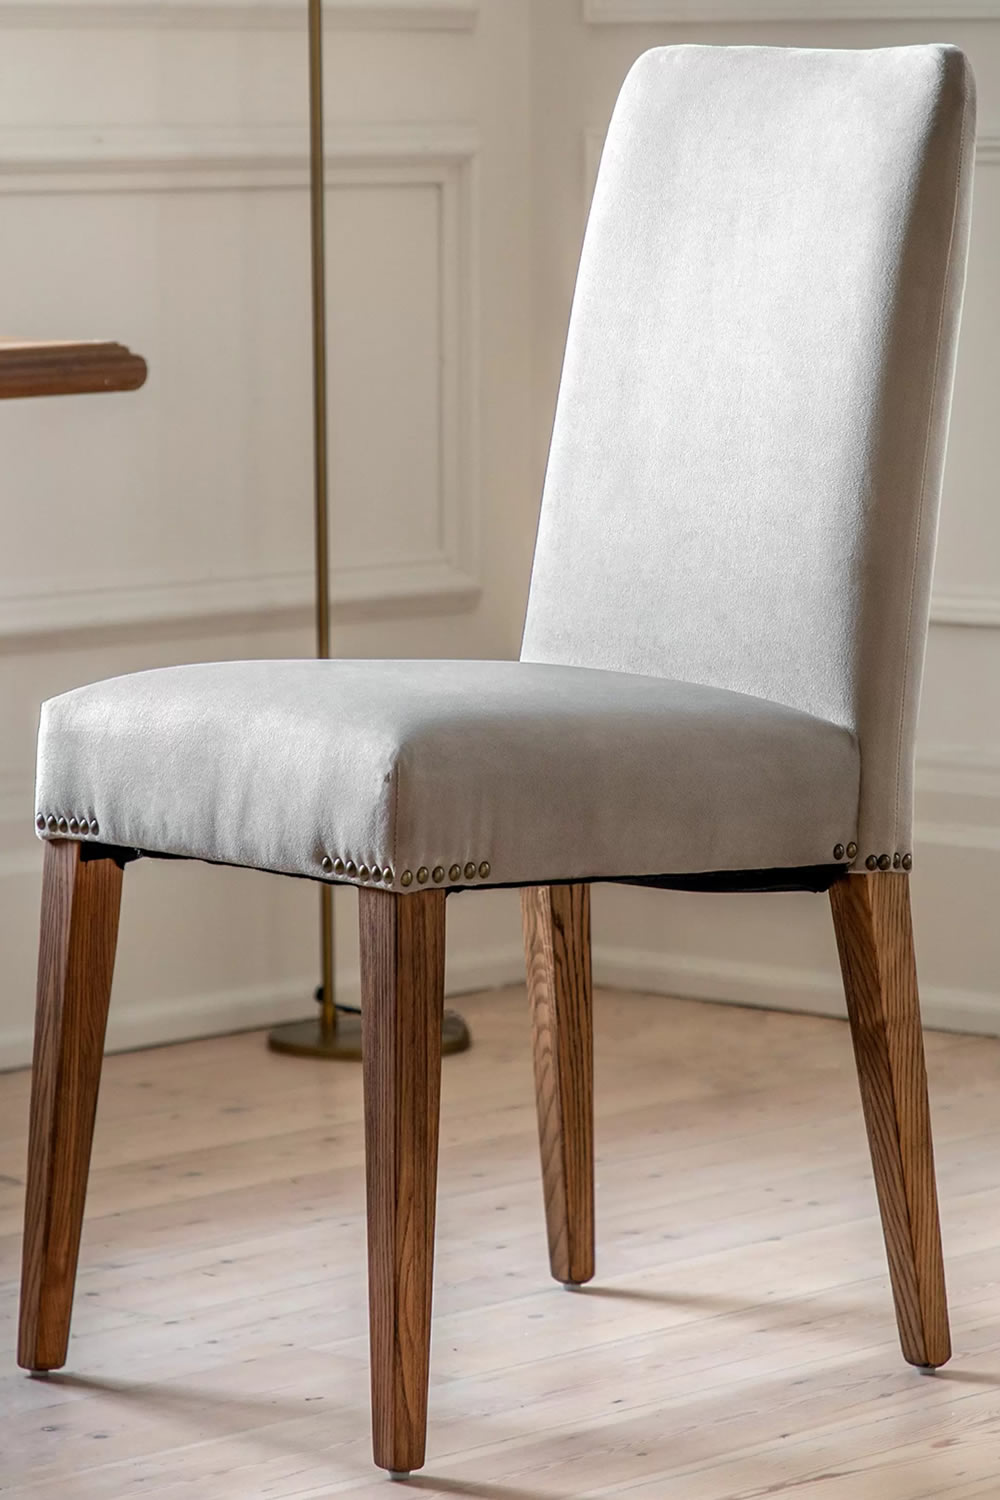 View Highgrove Dove Velvet High Back Dining Chair TwoPiece Set Upholstered in Taupe Velvet Fabric With Metal Accents Sturdy Mindy Wooden Legs information